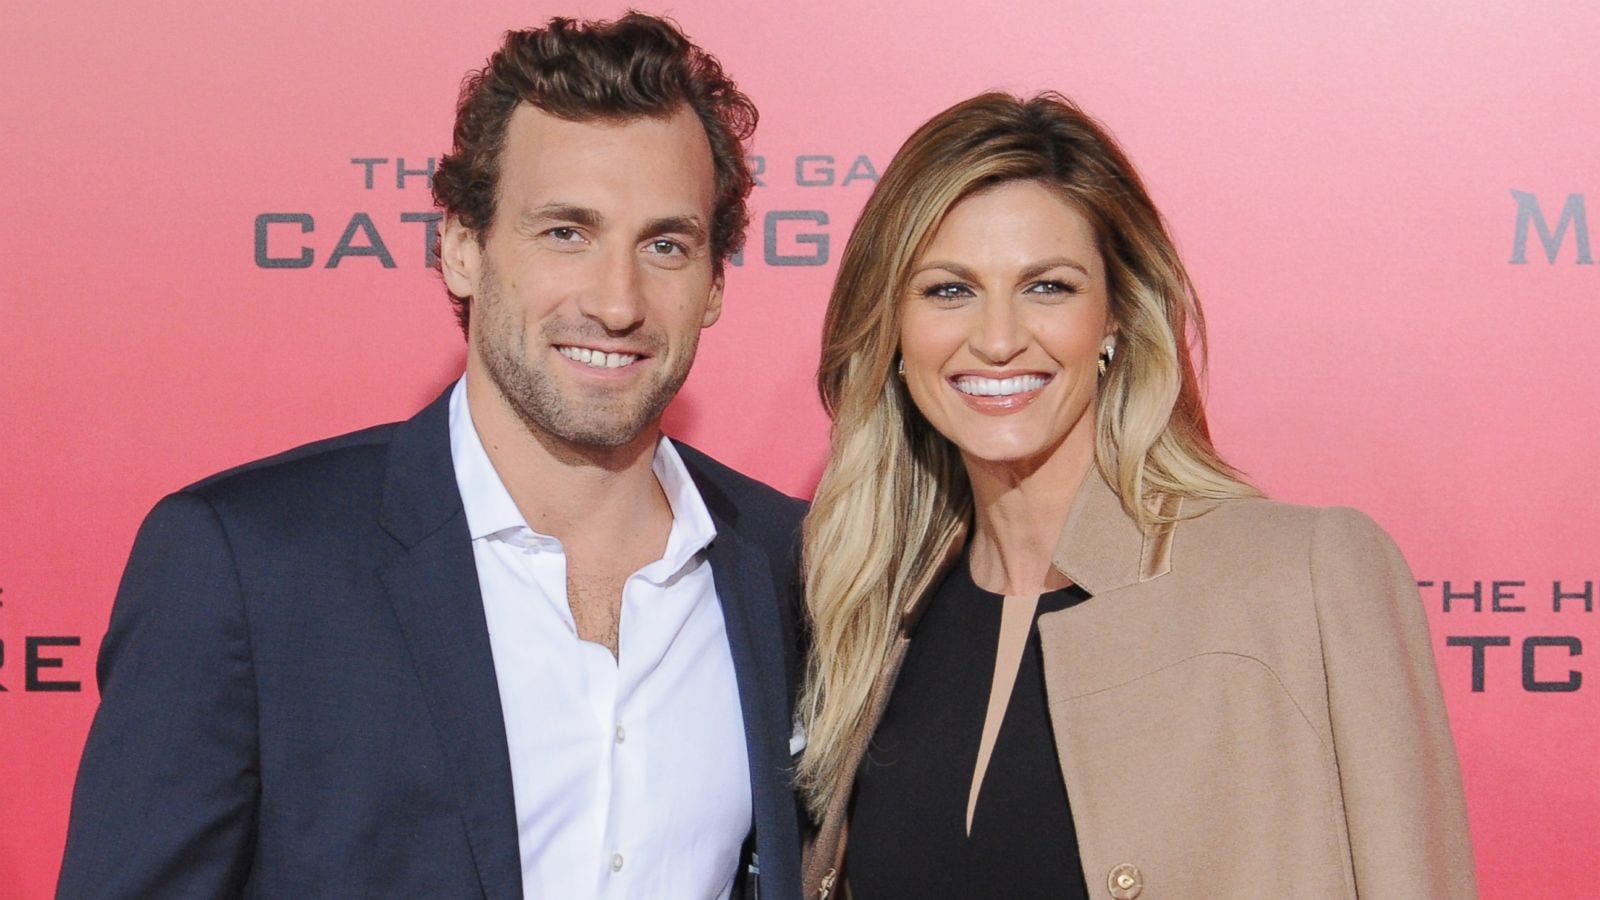 Who Is Erin Andrews Dating?